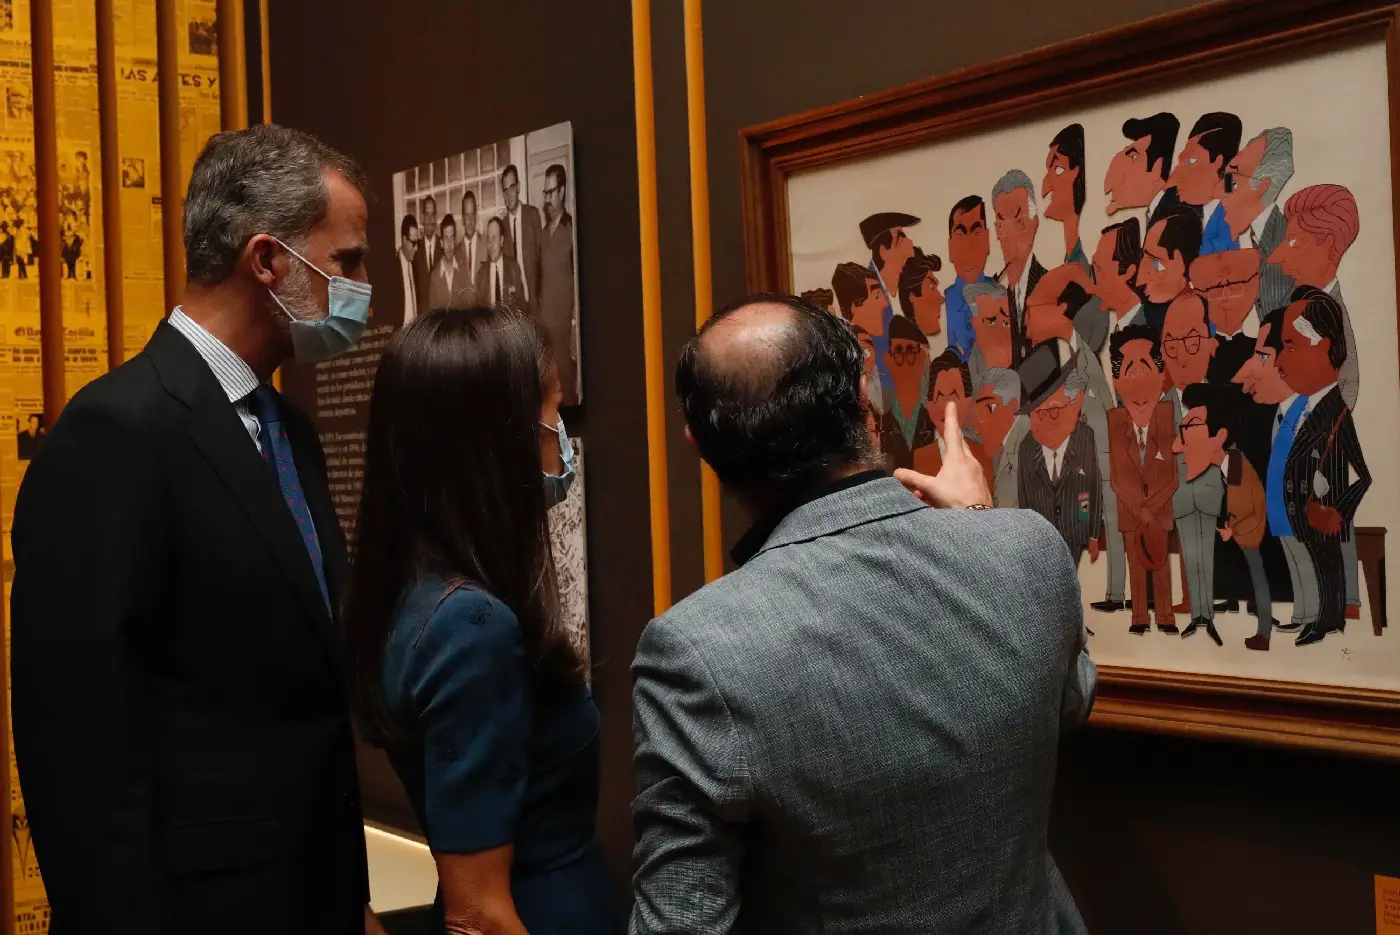 King Felipe and Queen Letizia of Spain at the exhibitio in National Library of Spain